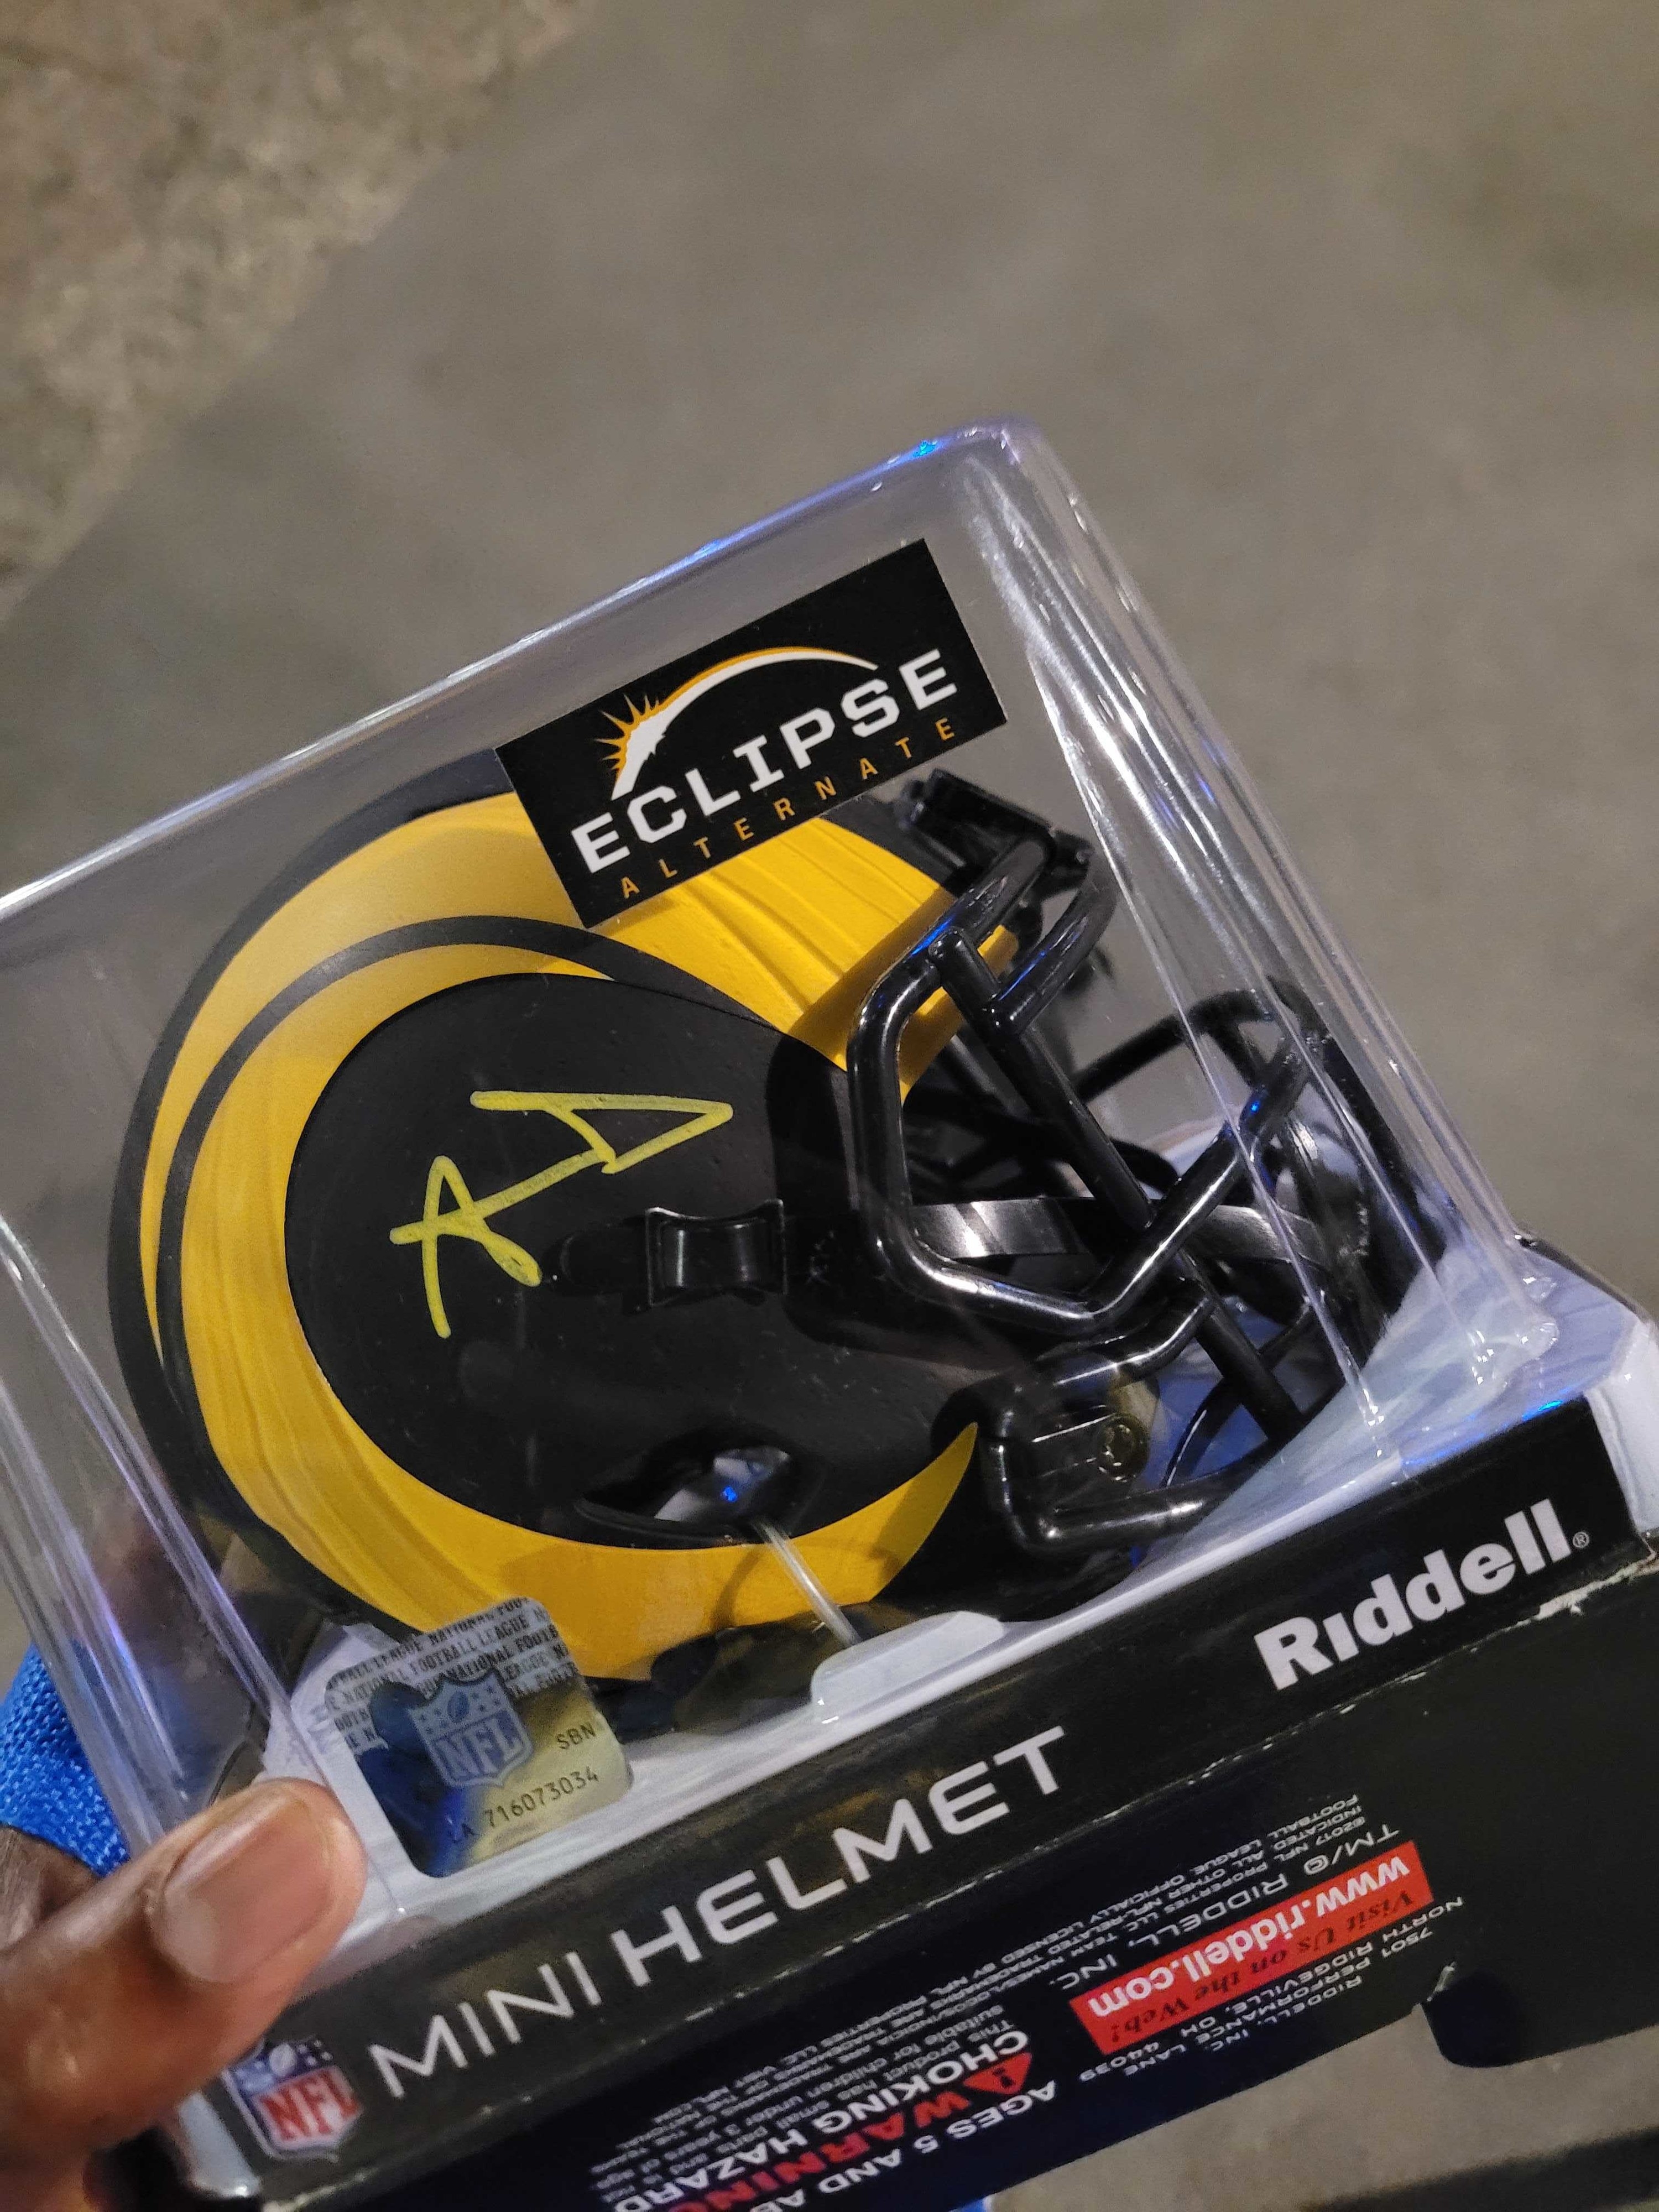 An AD signed helmet